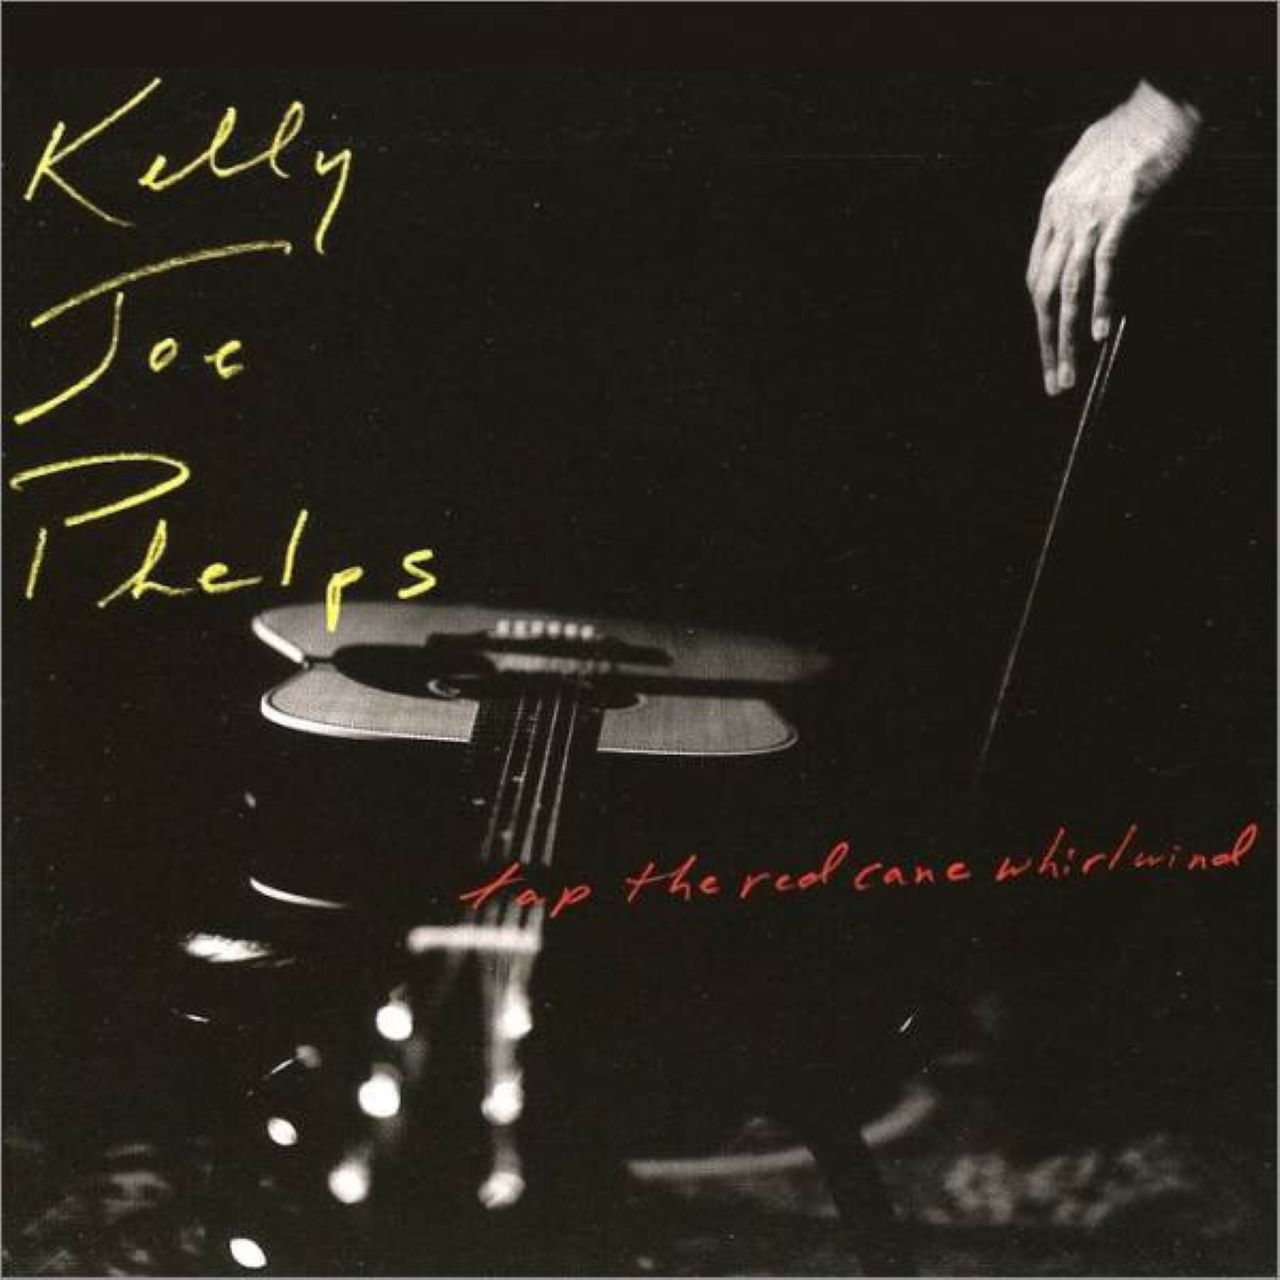 Kelly Joe Phelps - Tap The Red Cane Whirlwind cover album